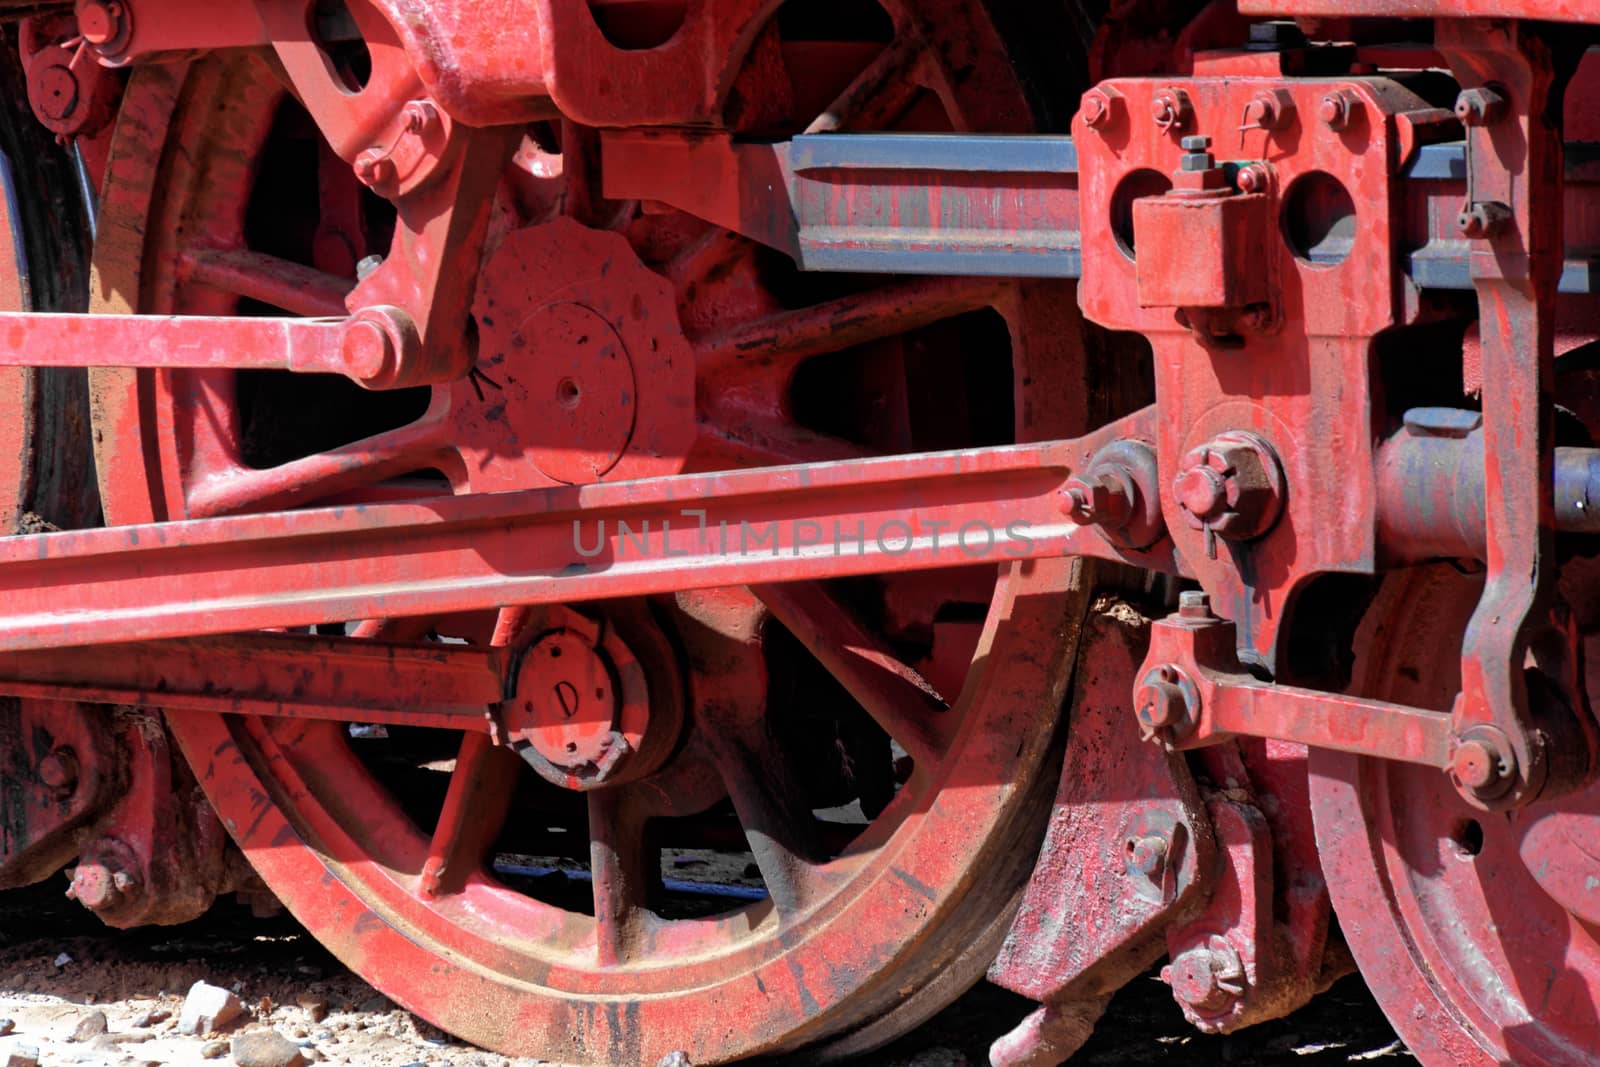 Detail of the steam locomotive, still in use, in the desert of Wadi Rum, Jordan, middle east